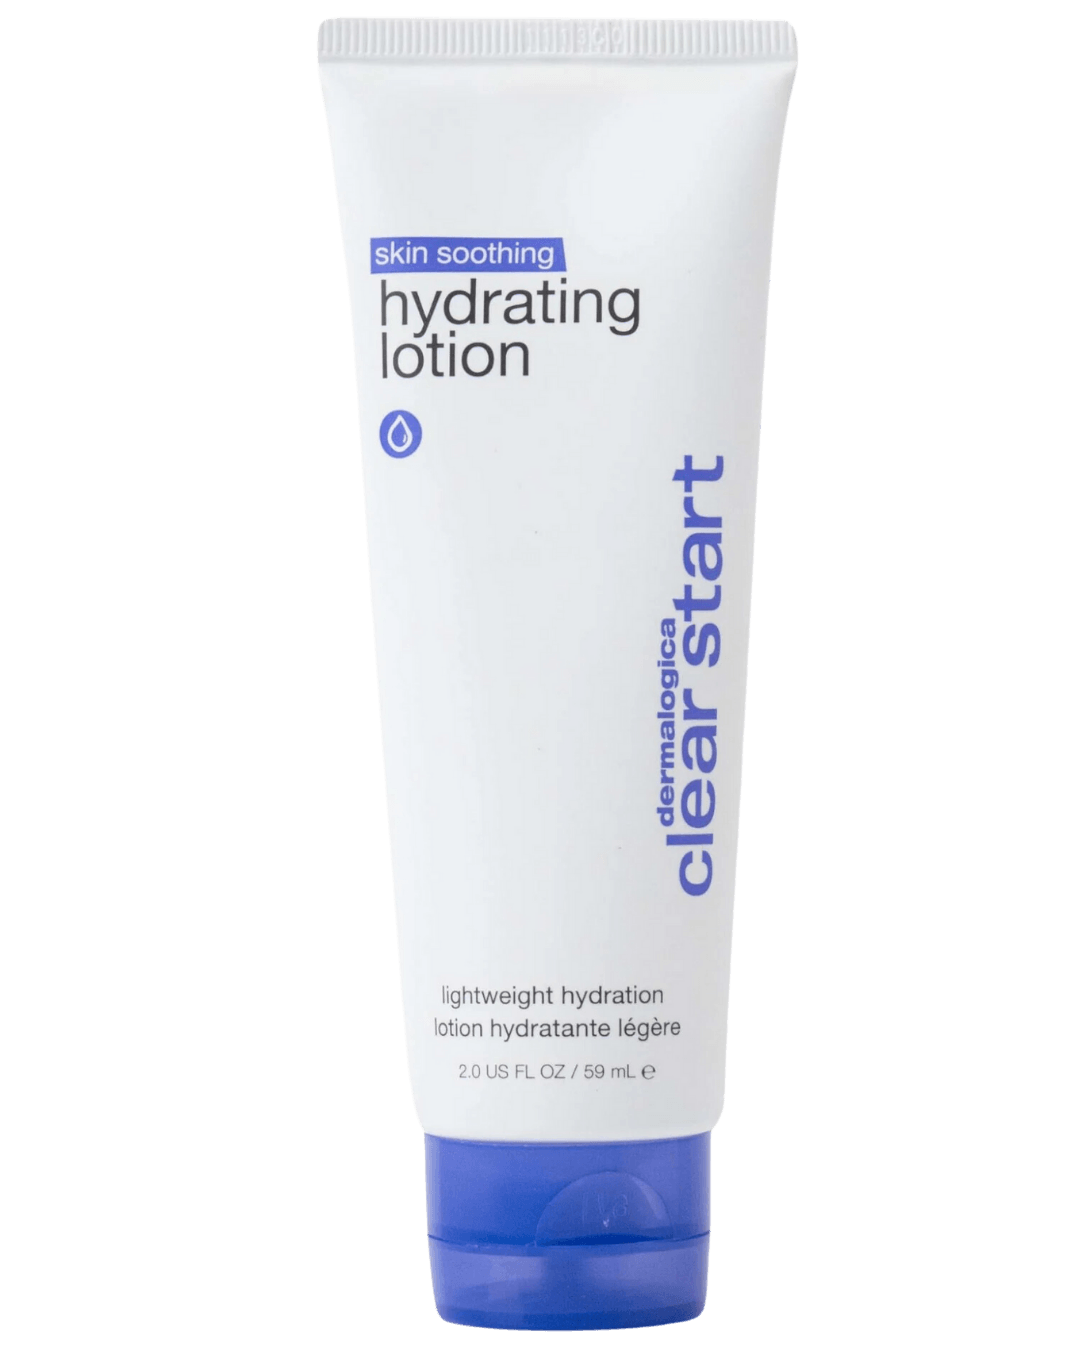 Daily Vanity Beauty Awards 2024 Best  Clear Start by Dermalogica Skin Soothing Hydrating Lotion Voted By Beauty Experts